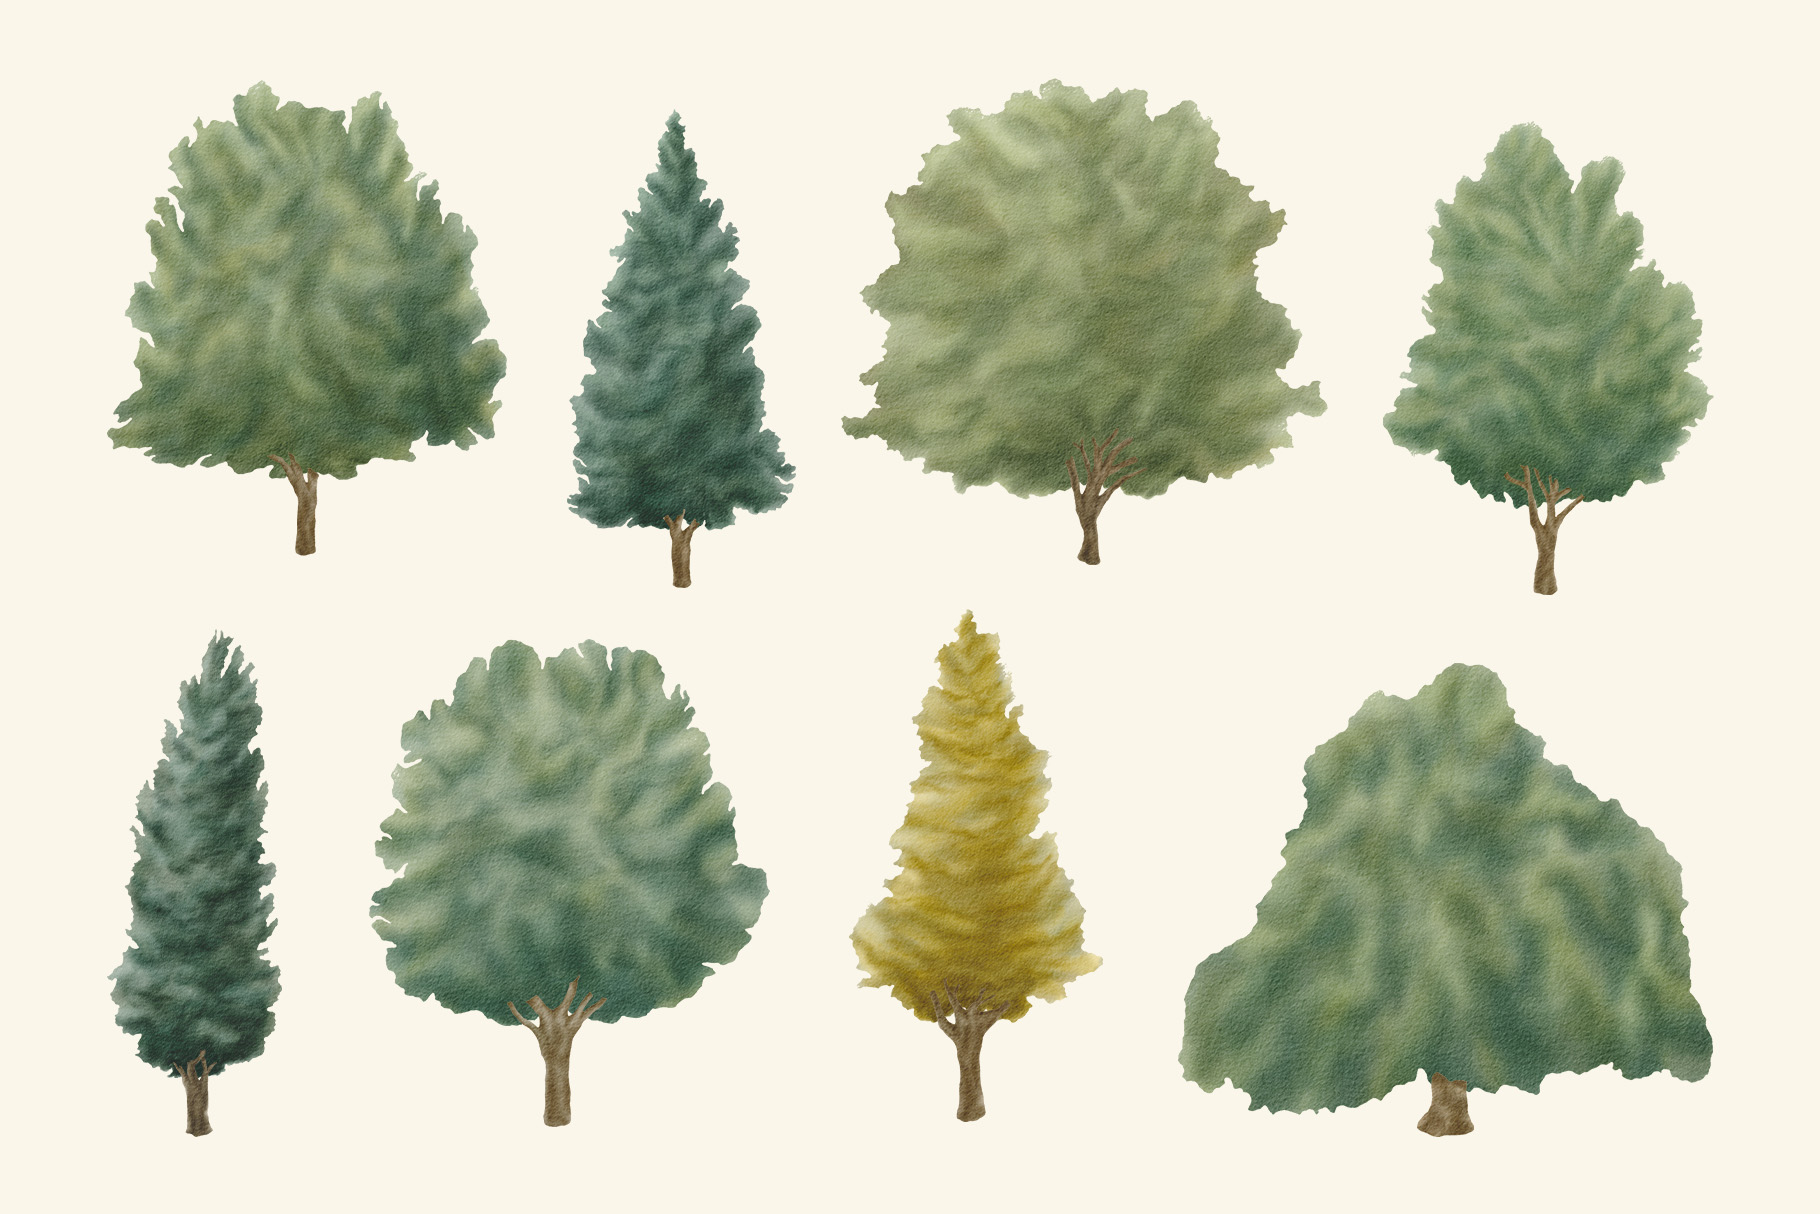 Watercolor Trees Illustration Set (PSD, PNG Format)